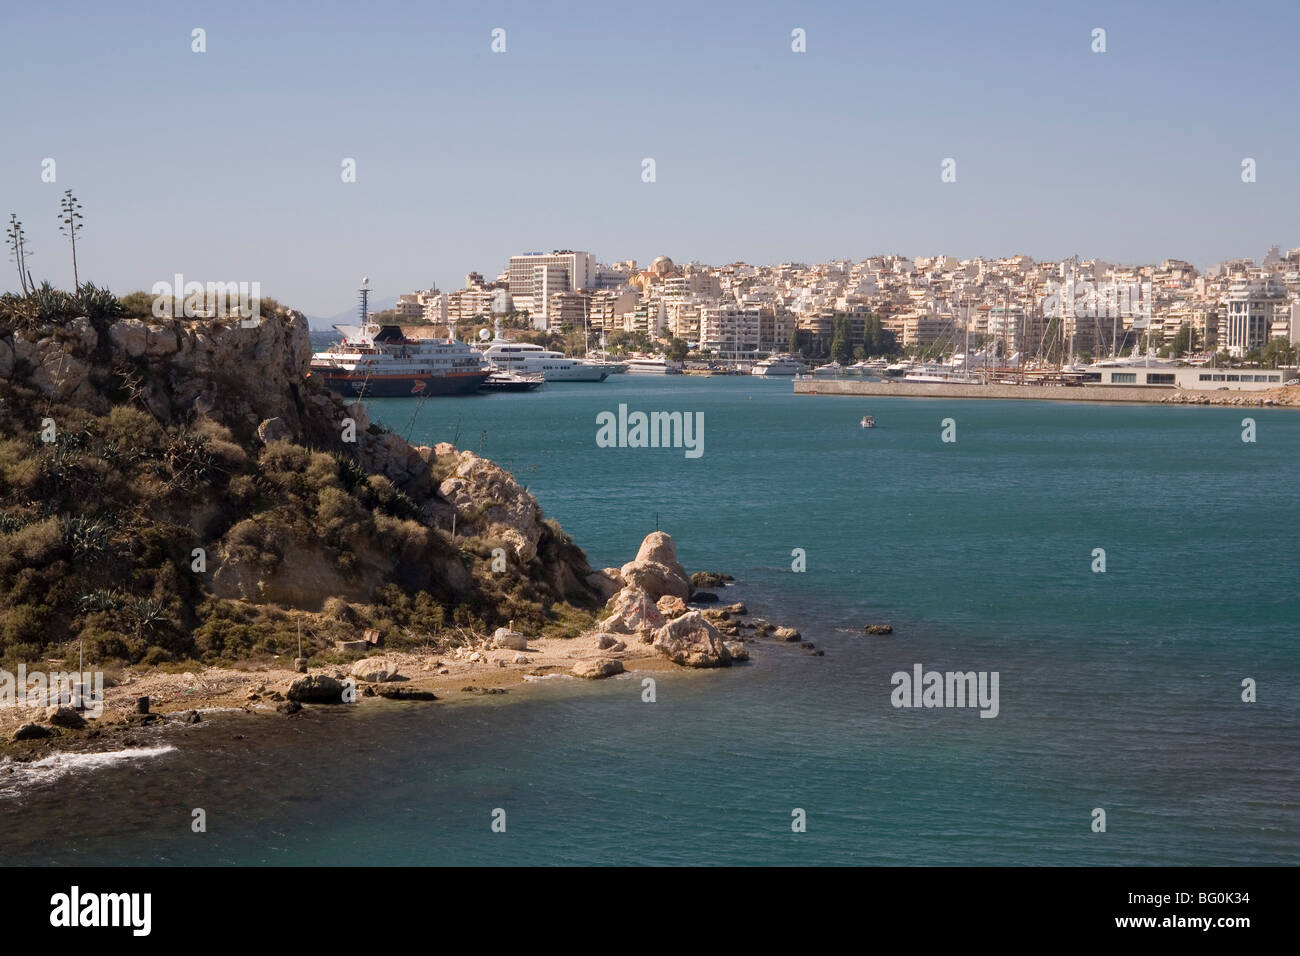 Piraeus Athens High Resolution Stock Photography and Images - Alamy